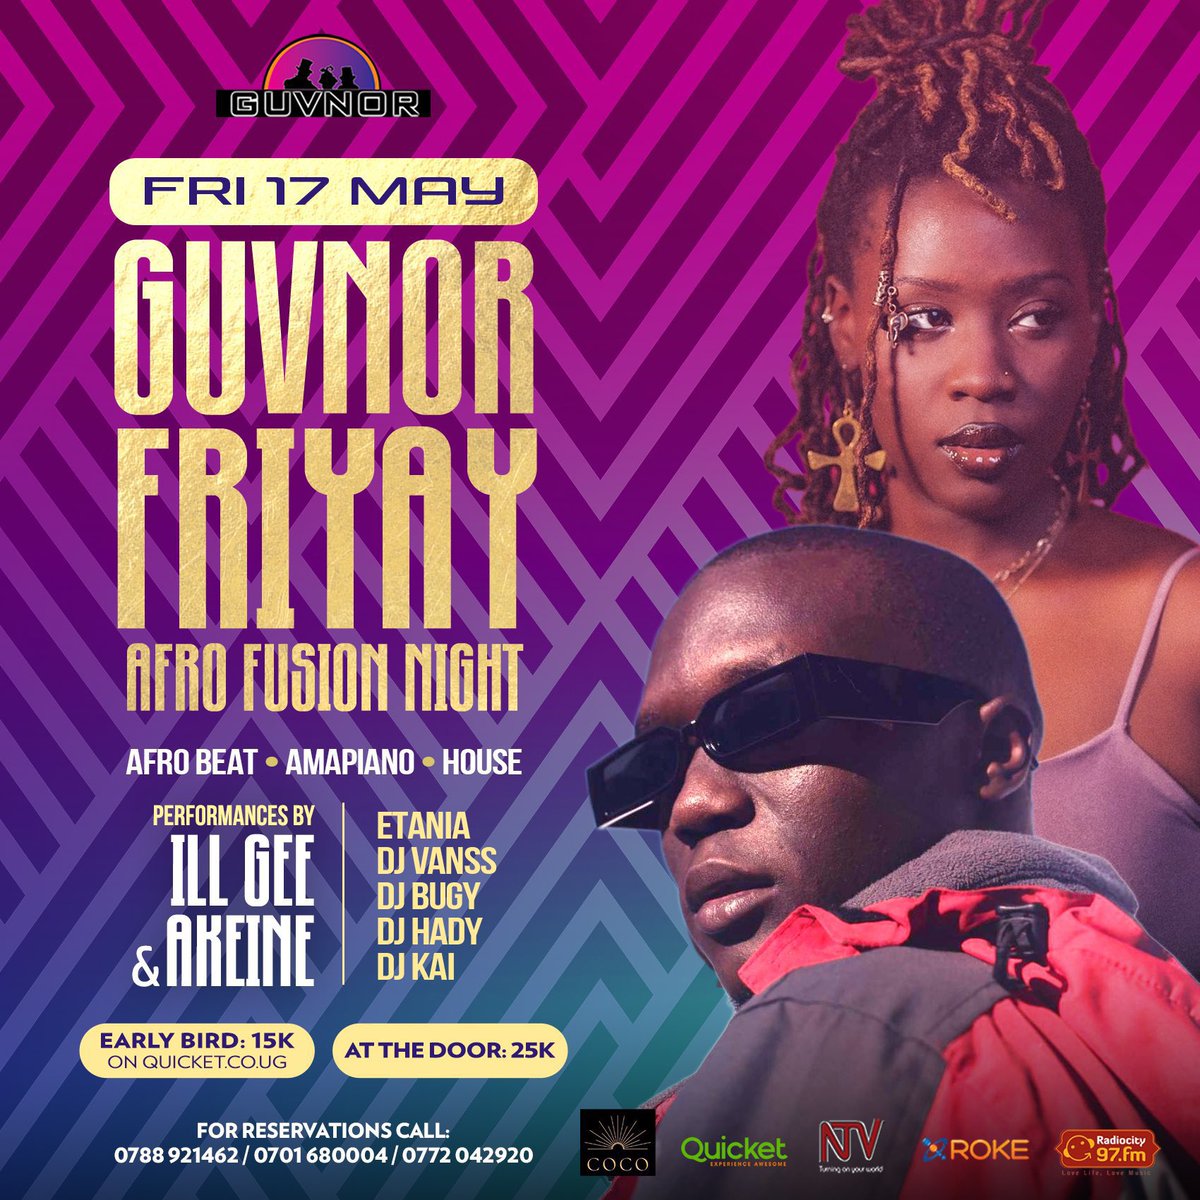 FRIDAY PLOT: 17/05 📌GUVNOR FRIDAY AFRO FUSION NIGHT FEATURING @NiweAkeine & @illgee_ 📍@GuvnorUganda Update your calendars 📅 because Friday is for the books, it’s time for an Afro-Fusion takeover with live performances and your favorite DJs on the ones & twos 🎛🎚